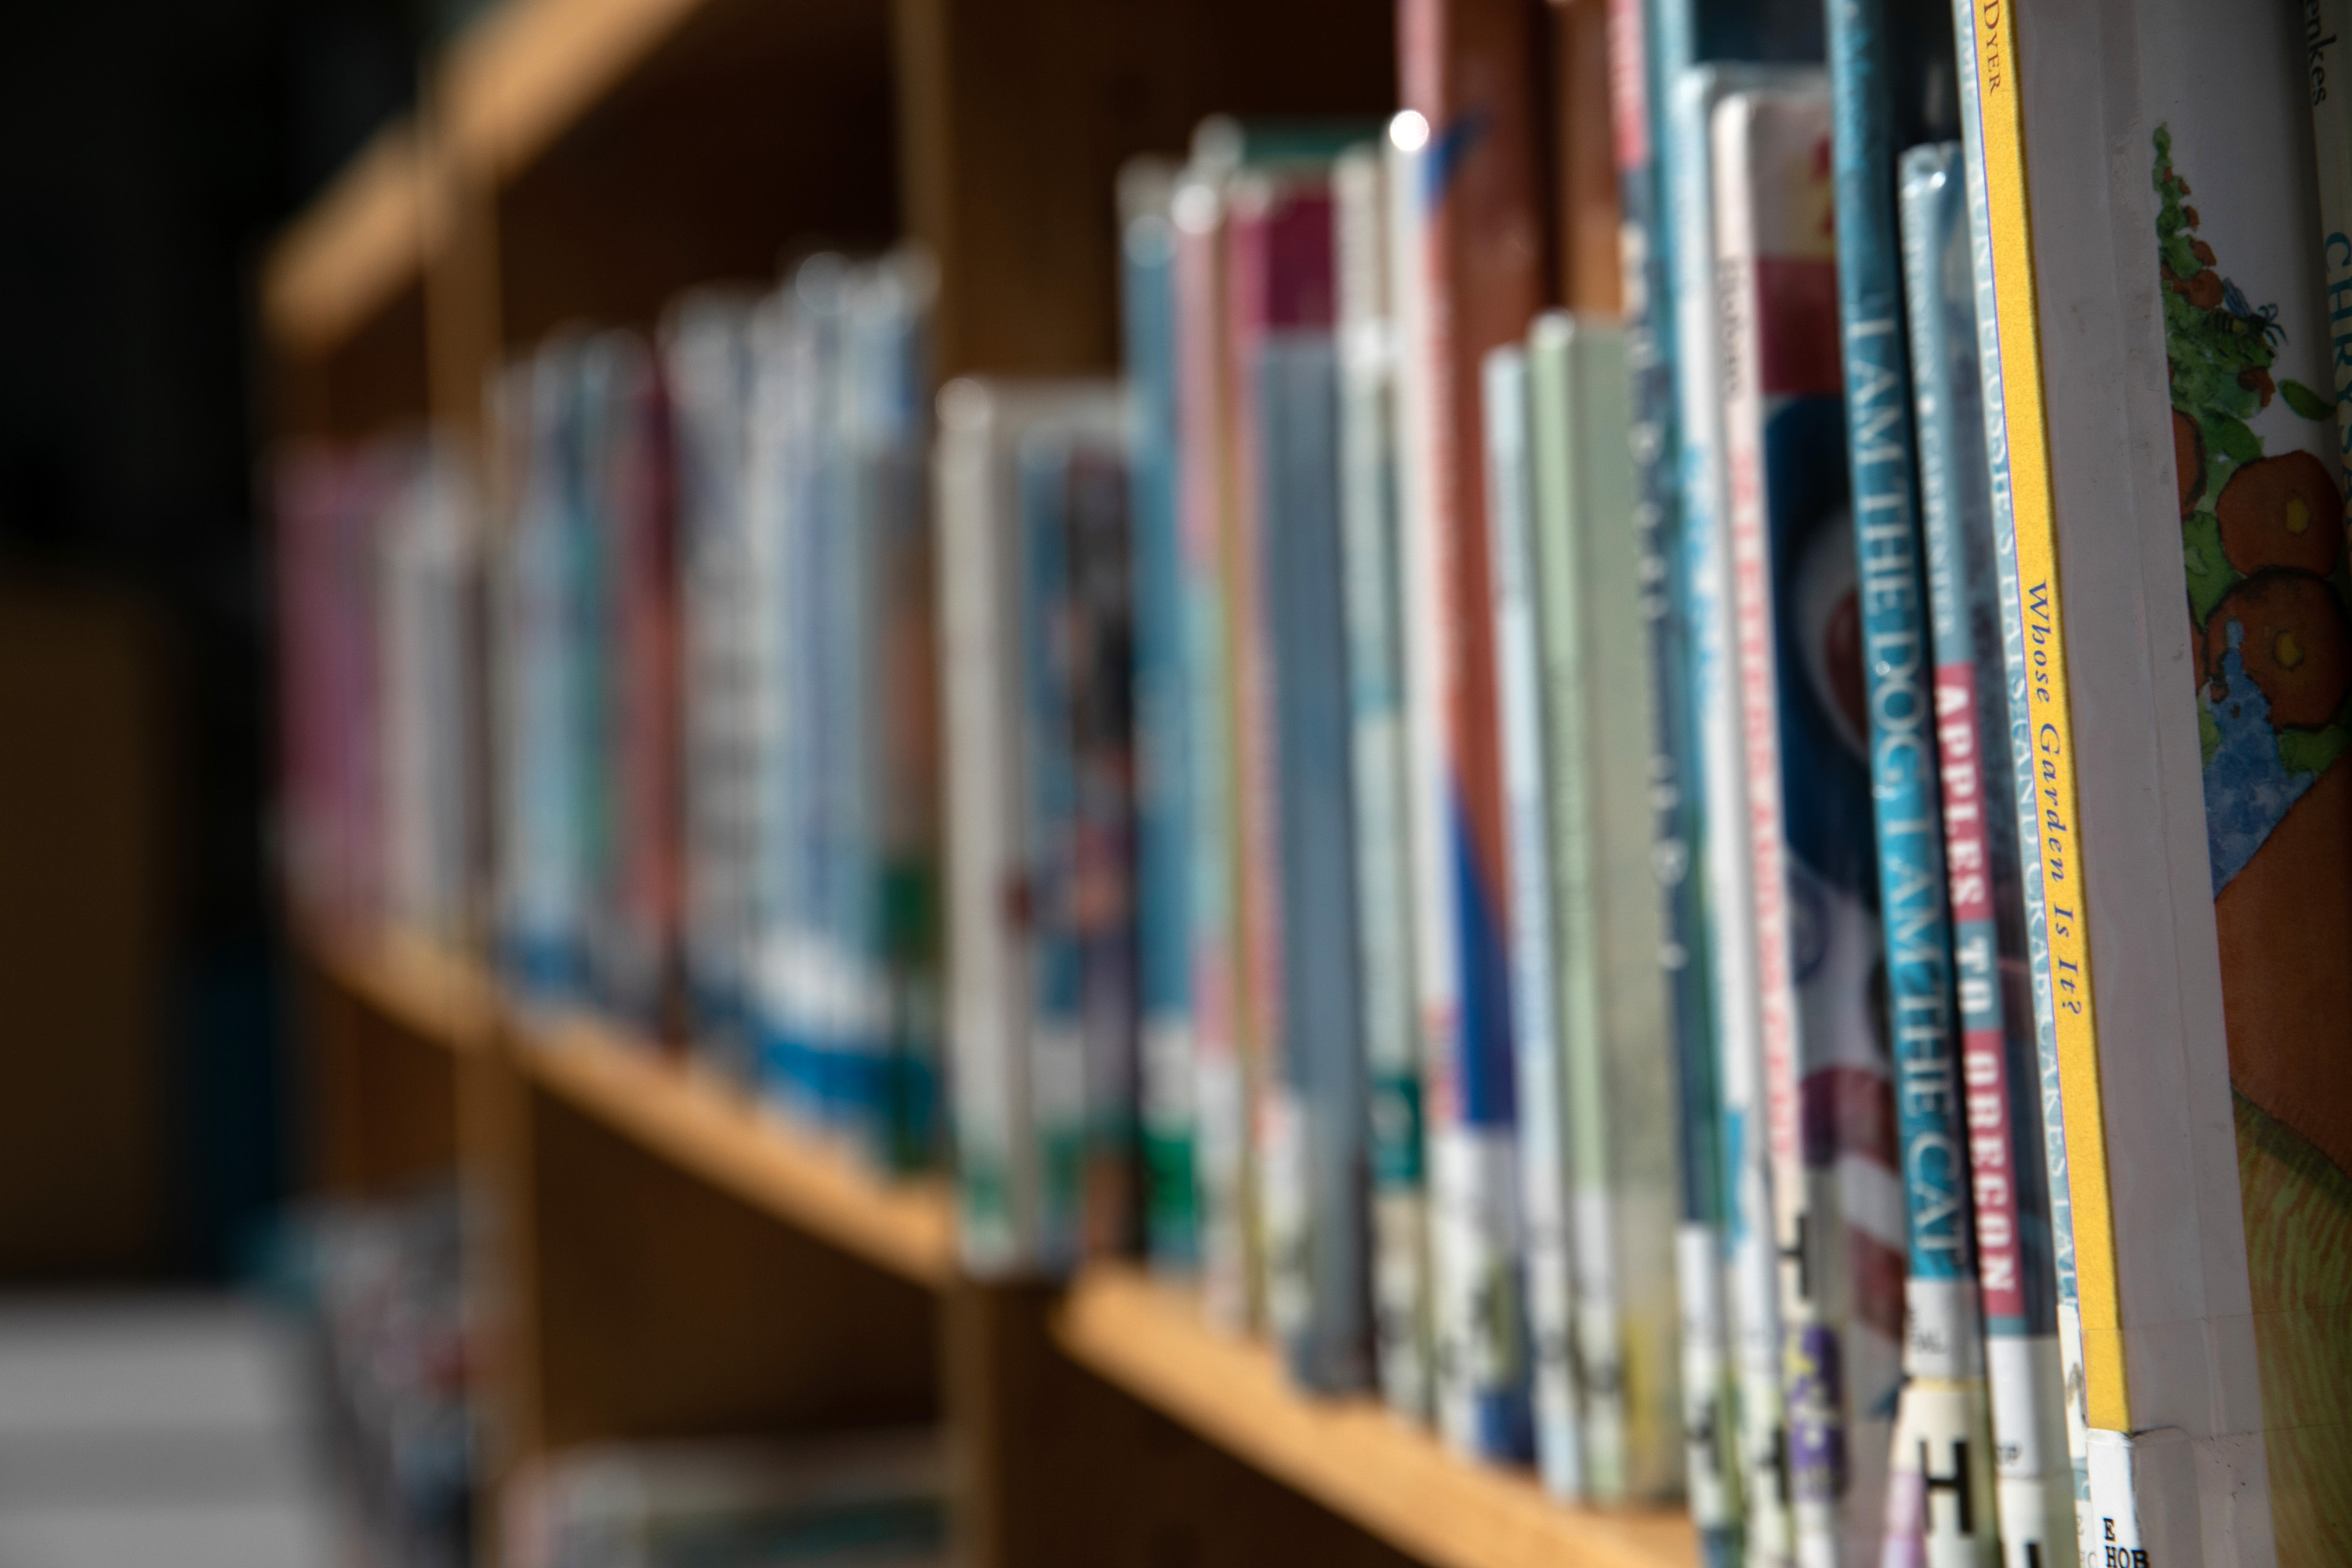 Xxx Hindi School - Do These Books Belong in Public School Libraries? You Be The Judge | Opinion